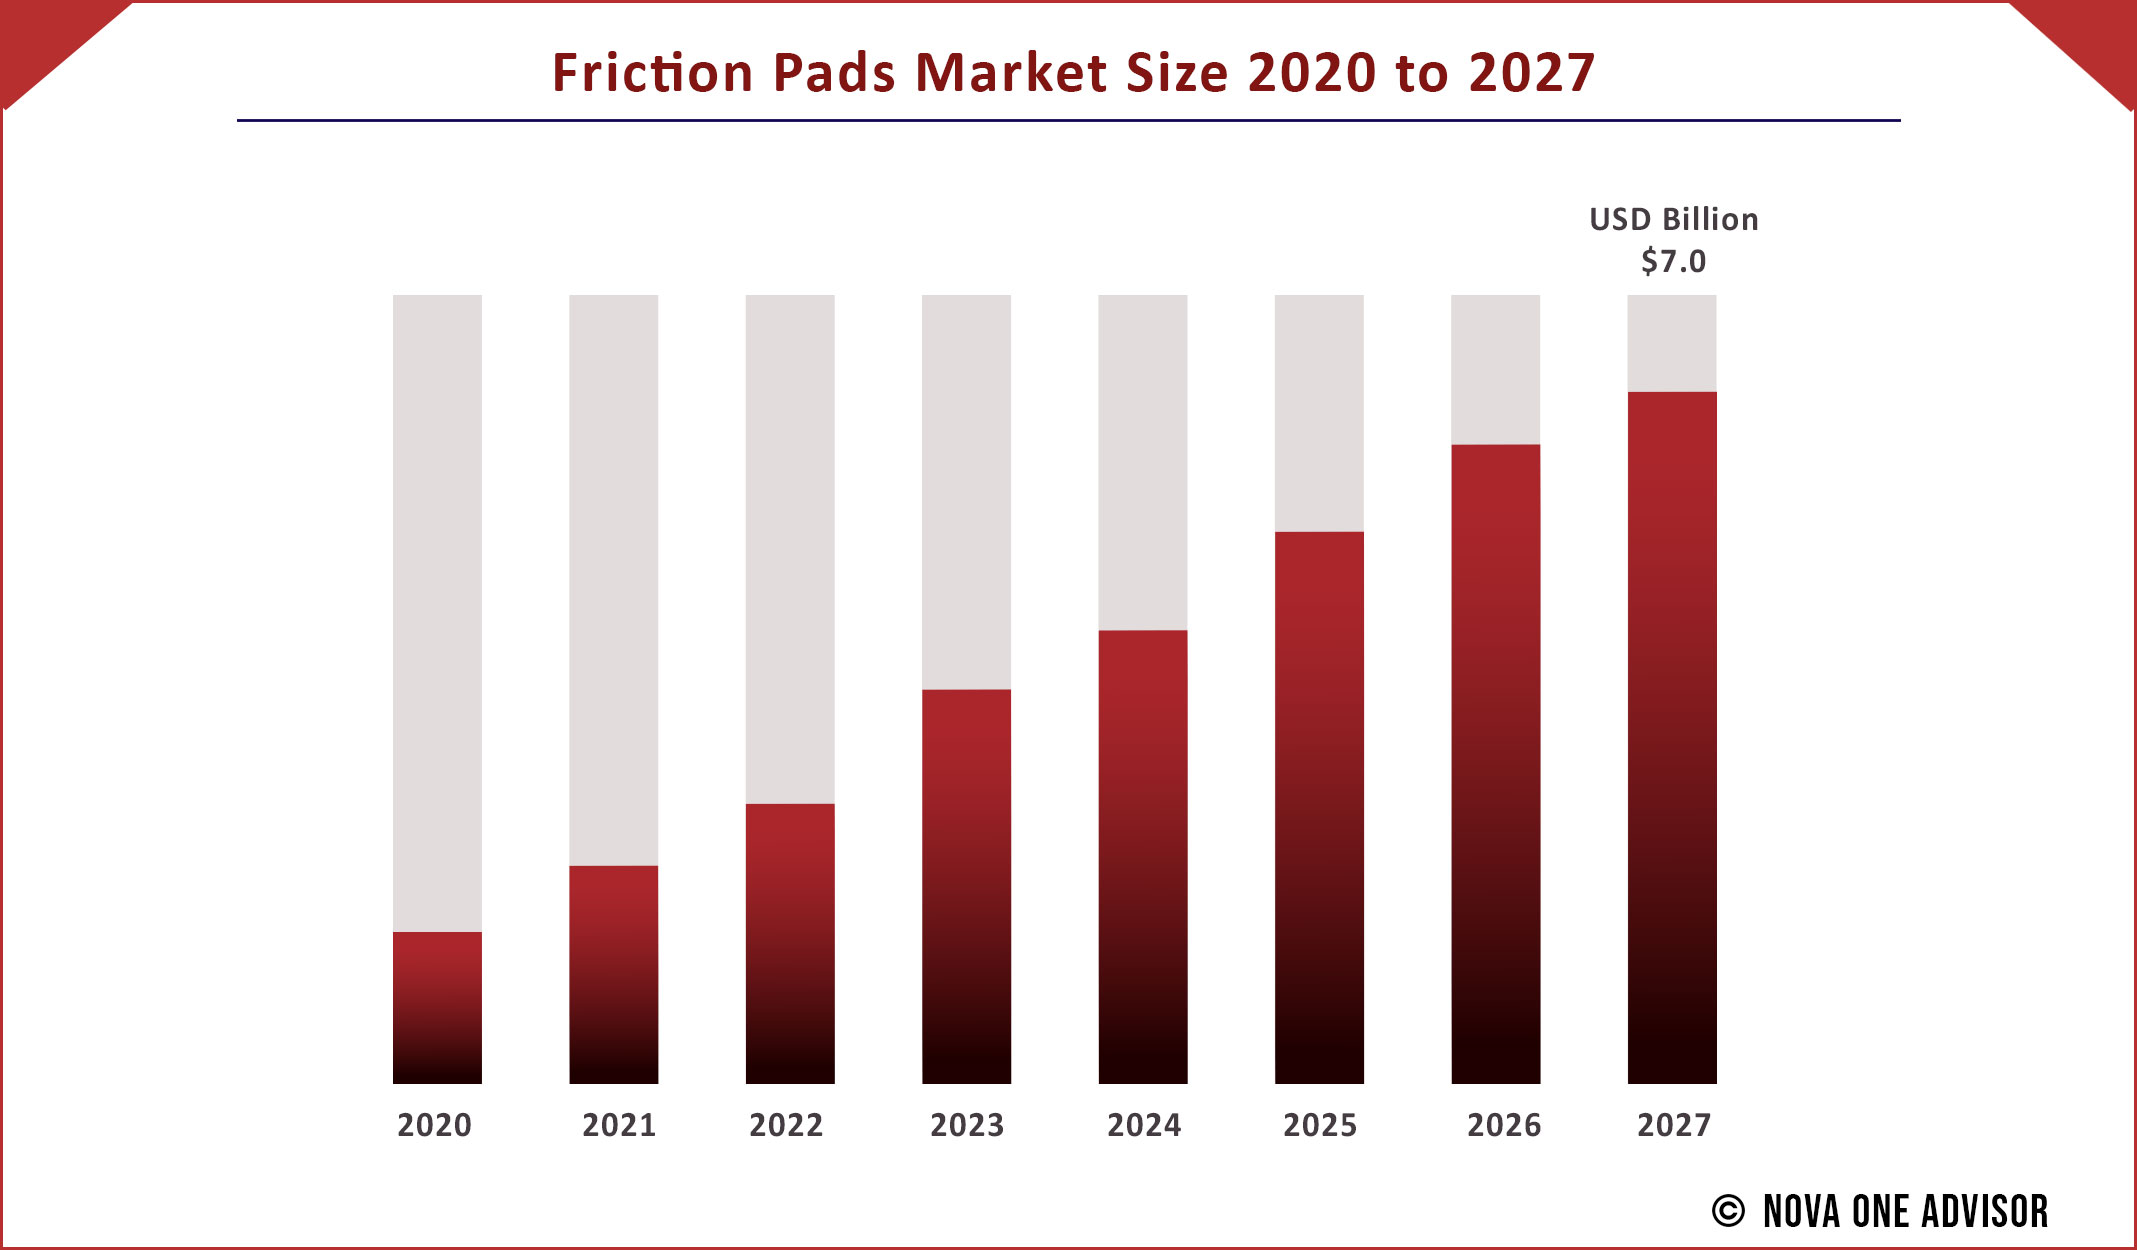 Friction Pads Market Size 2020 to 2027